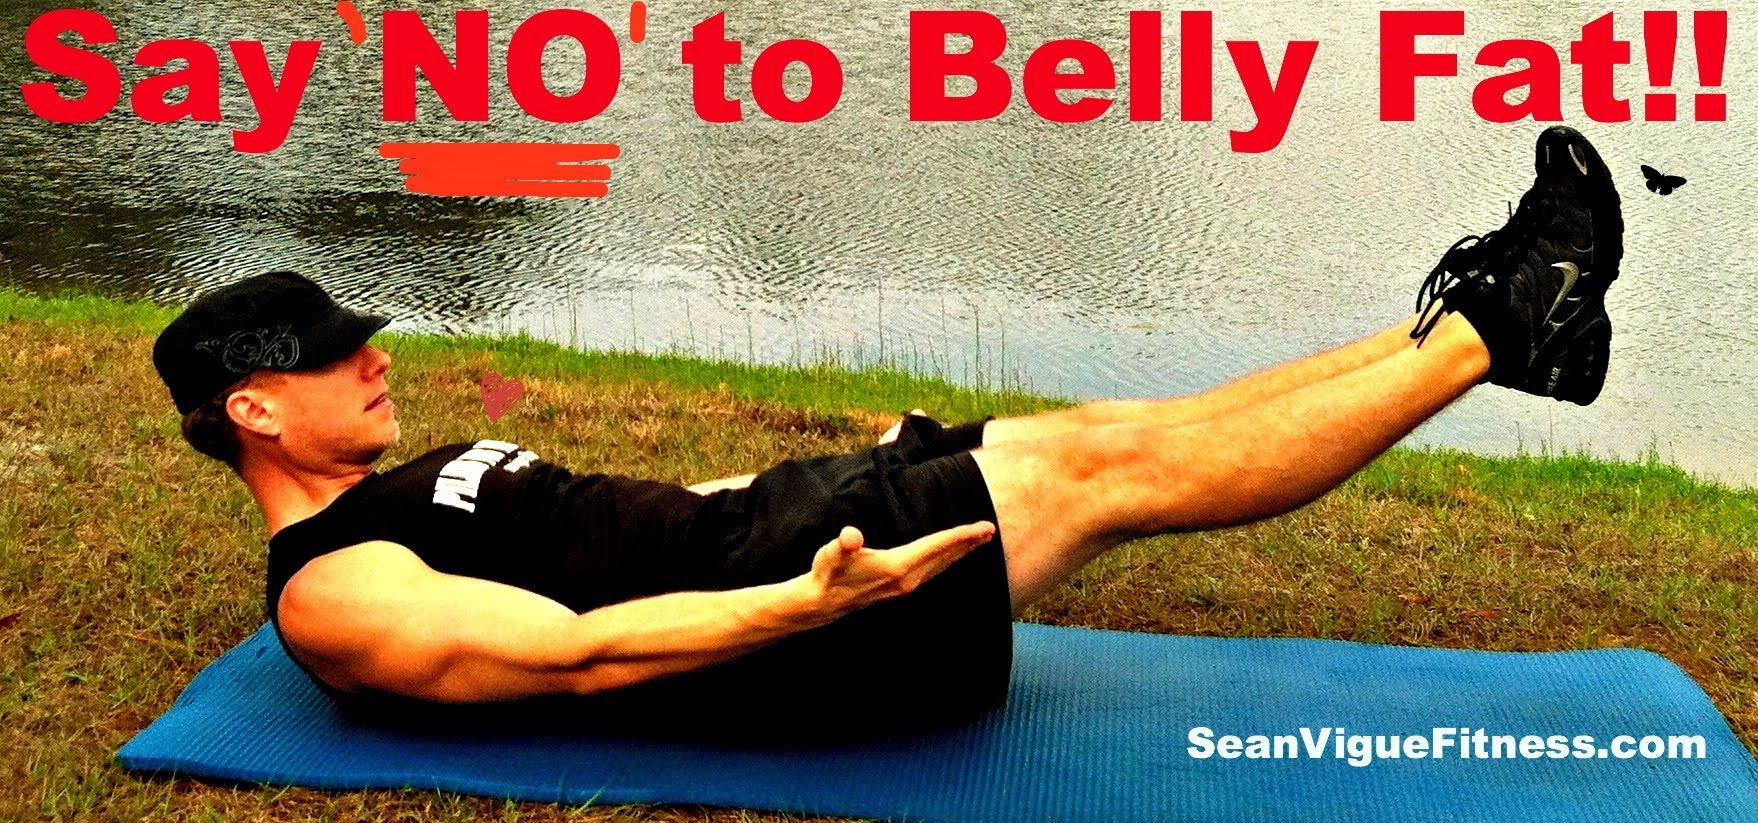 Dr Oen Blog: Yoga Positions To Lose Belly Fat